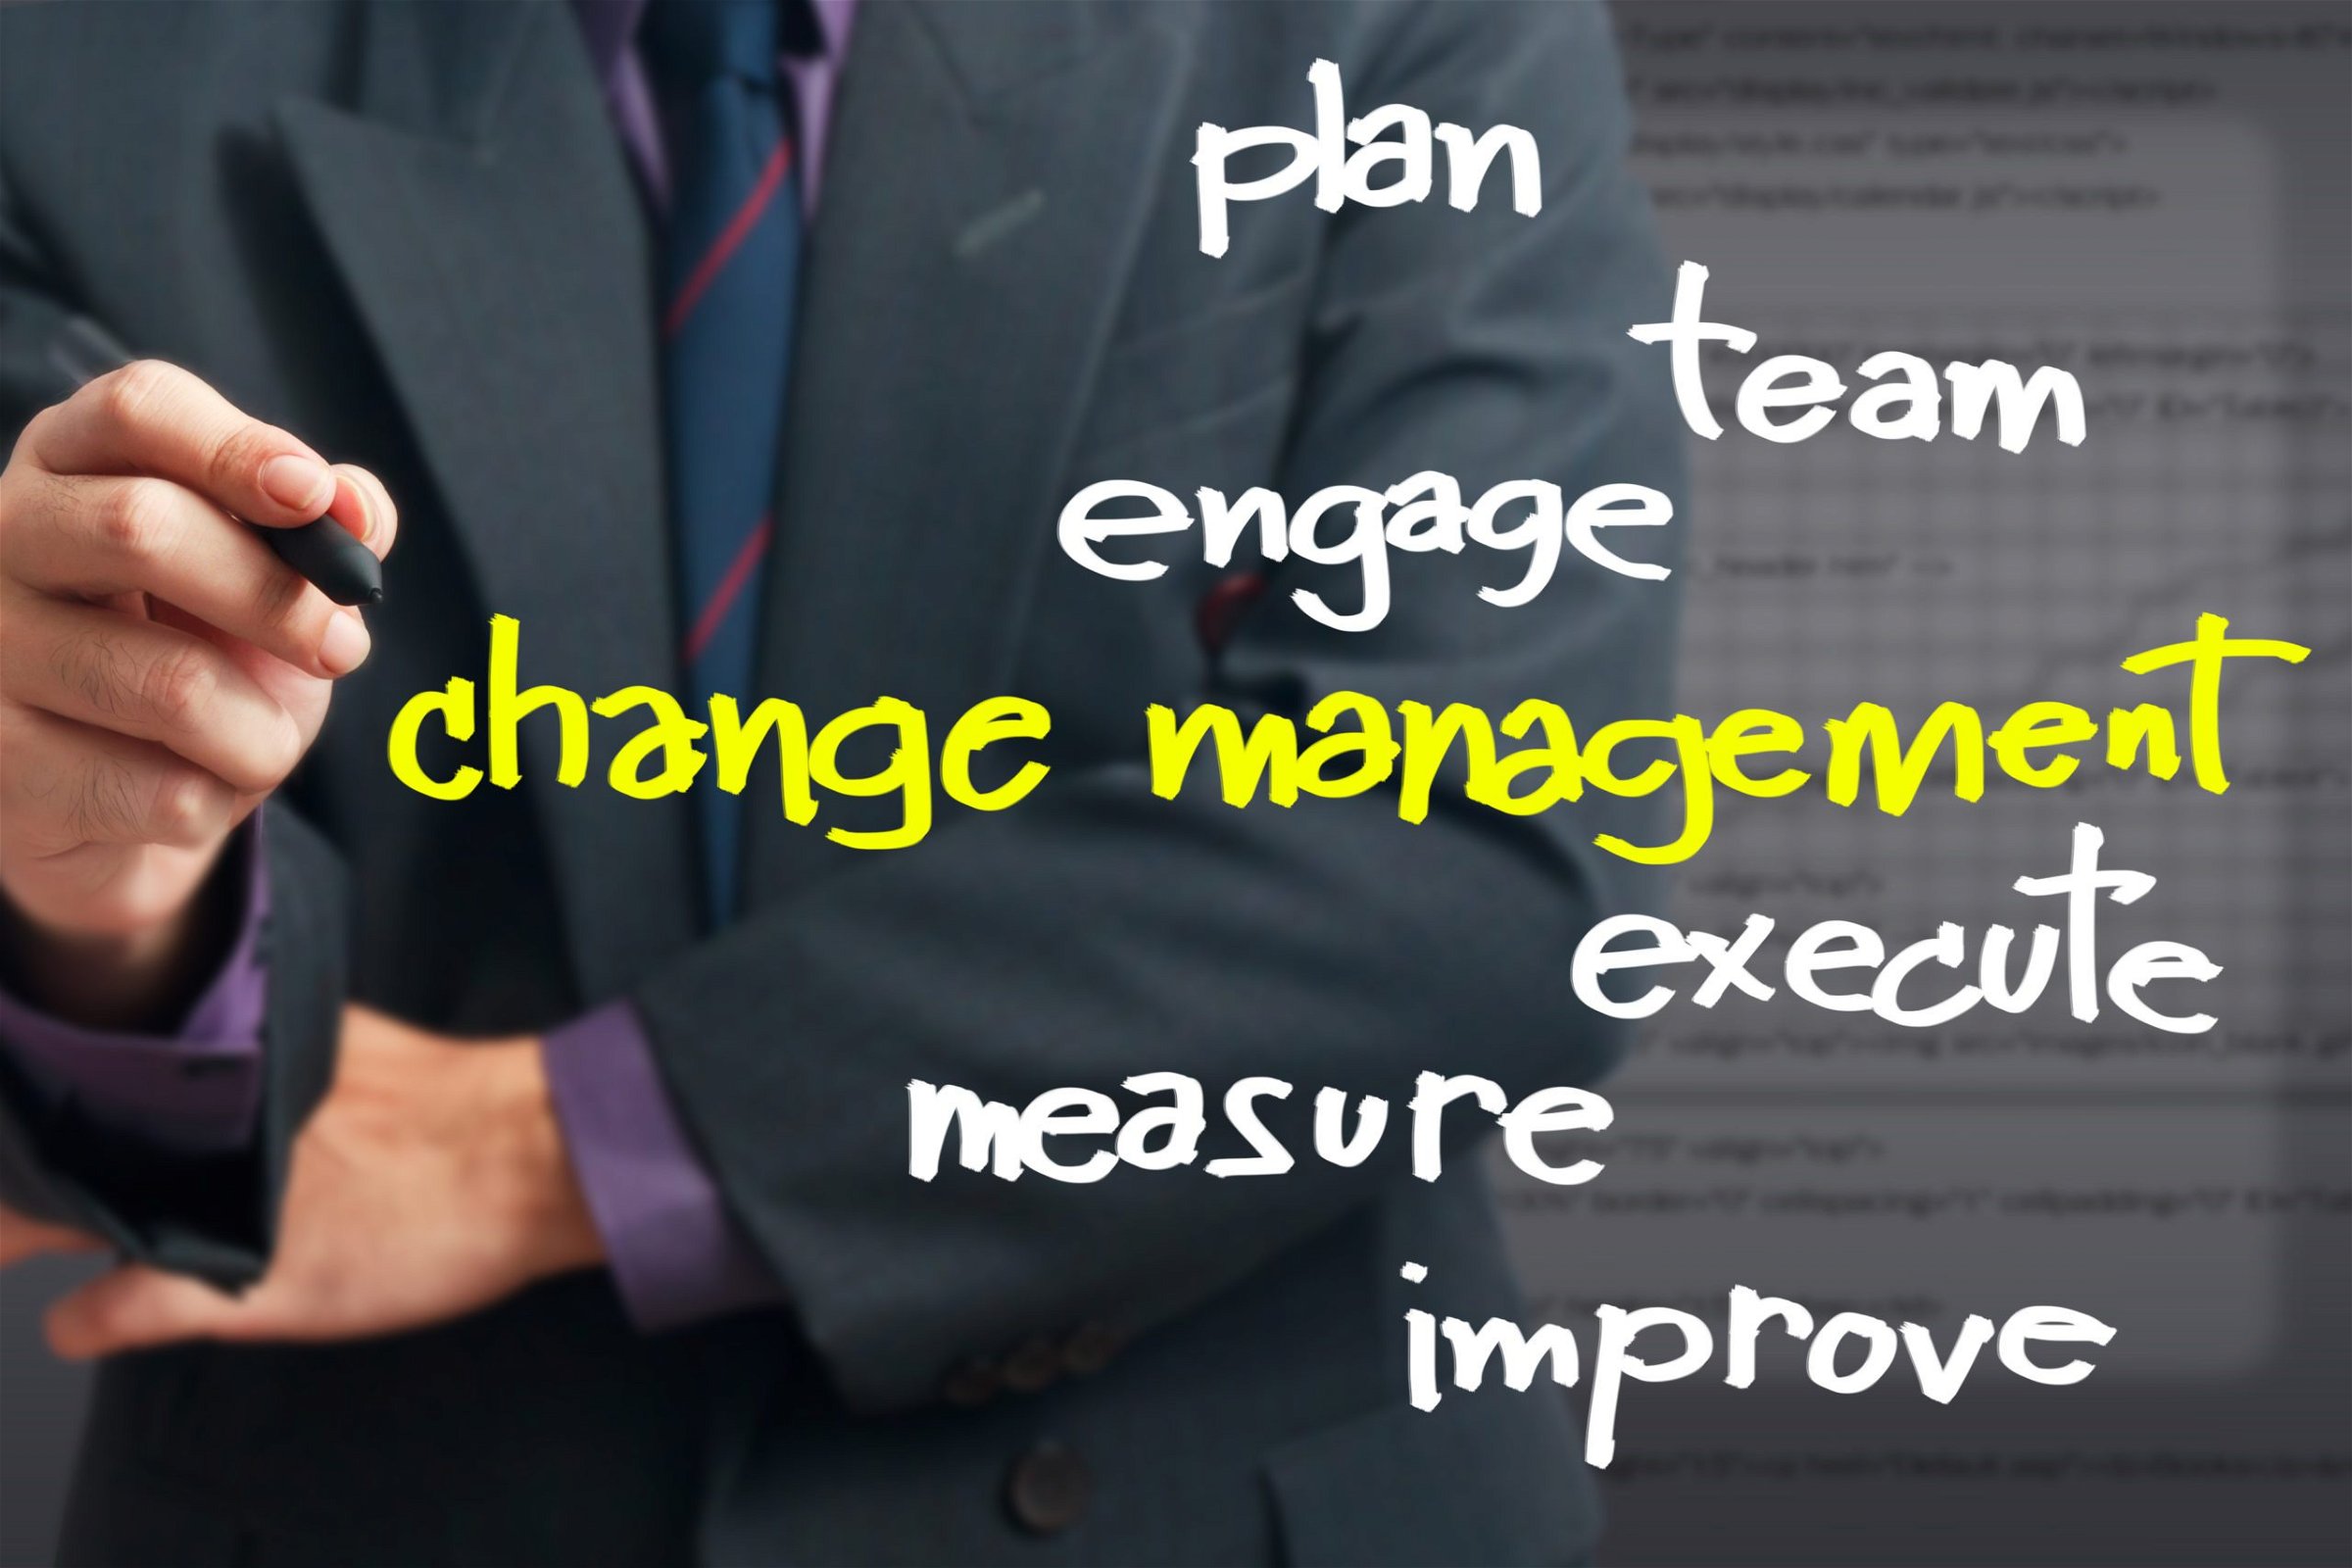 What are the Benefits of Change Management?